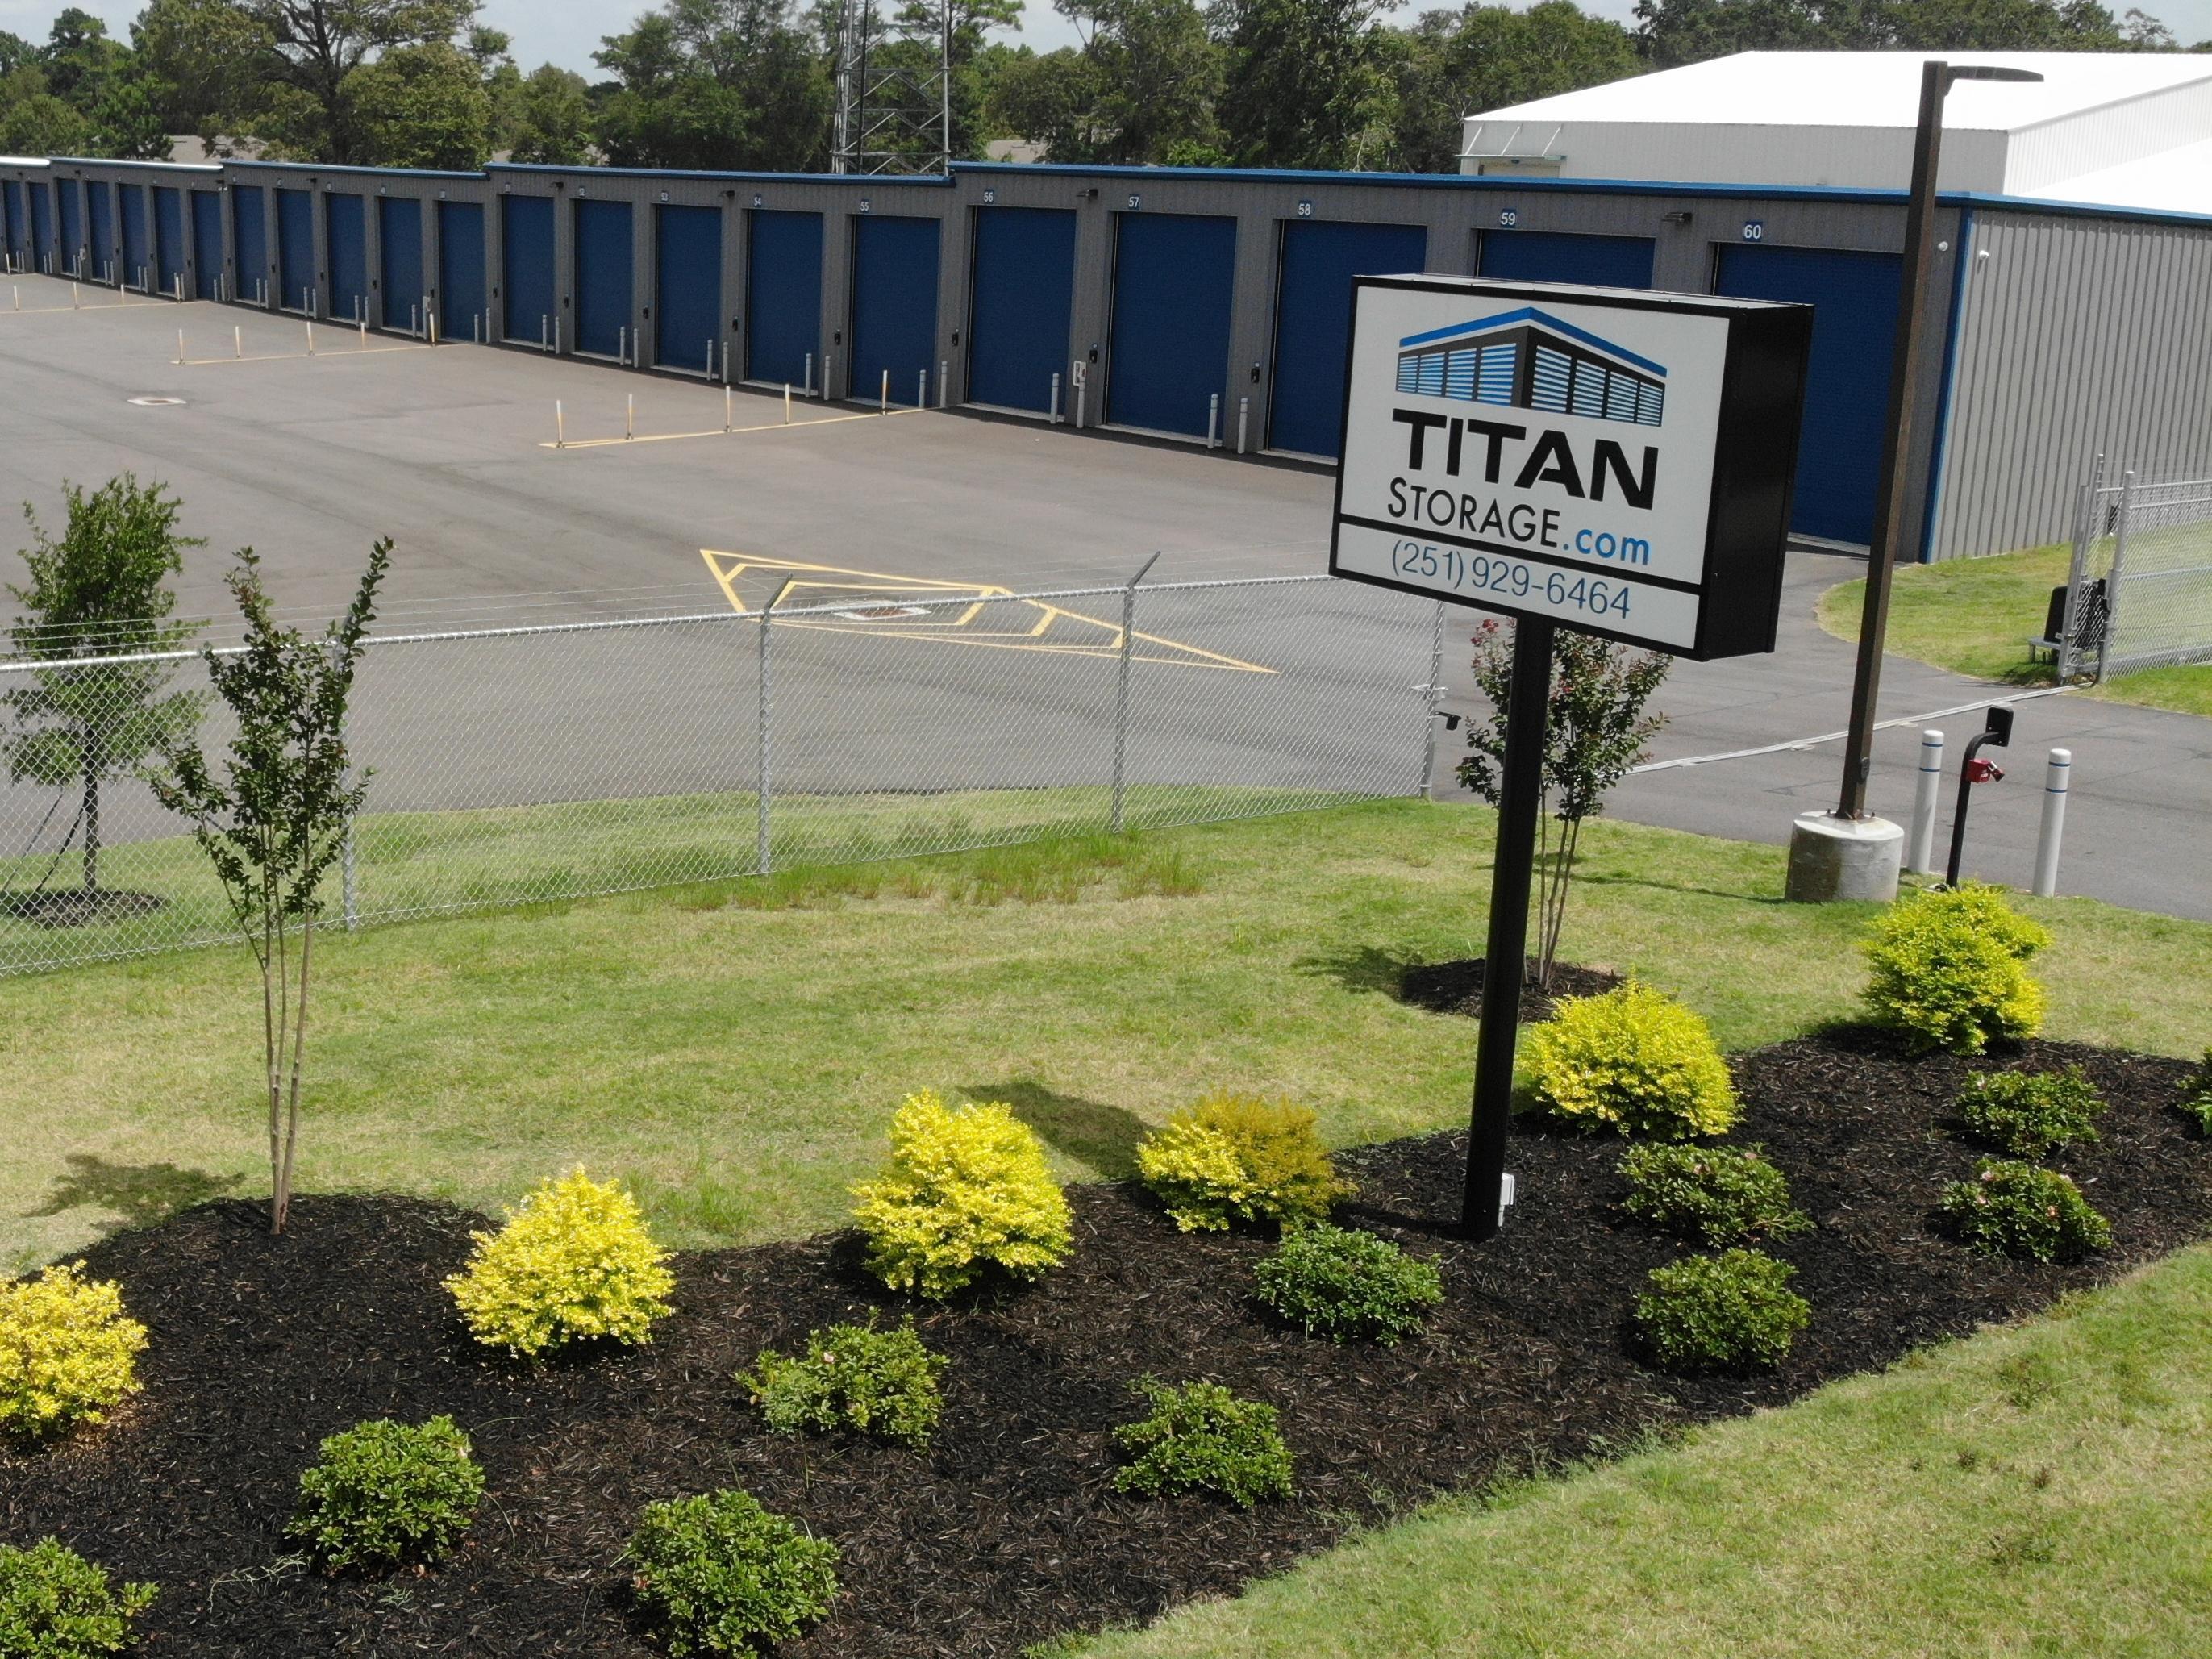 GET IN TOUCH WITH TITAN STORAGE FOR YOUR Fairhope, AL SMALL BUSINESS STORAGE UNIT SOLUTION